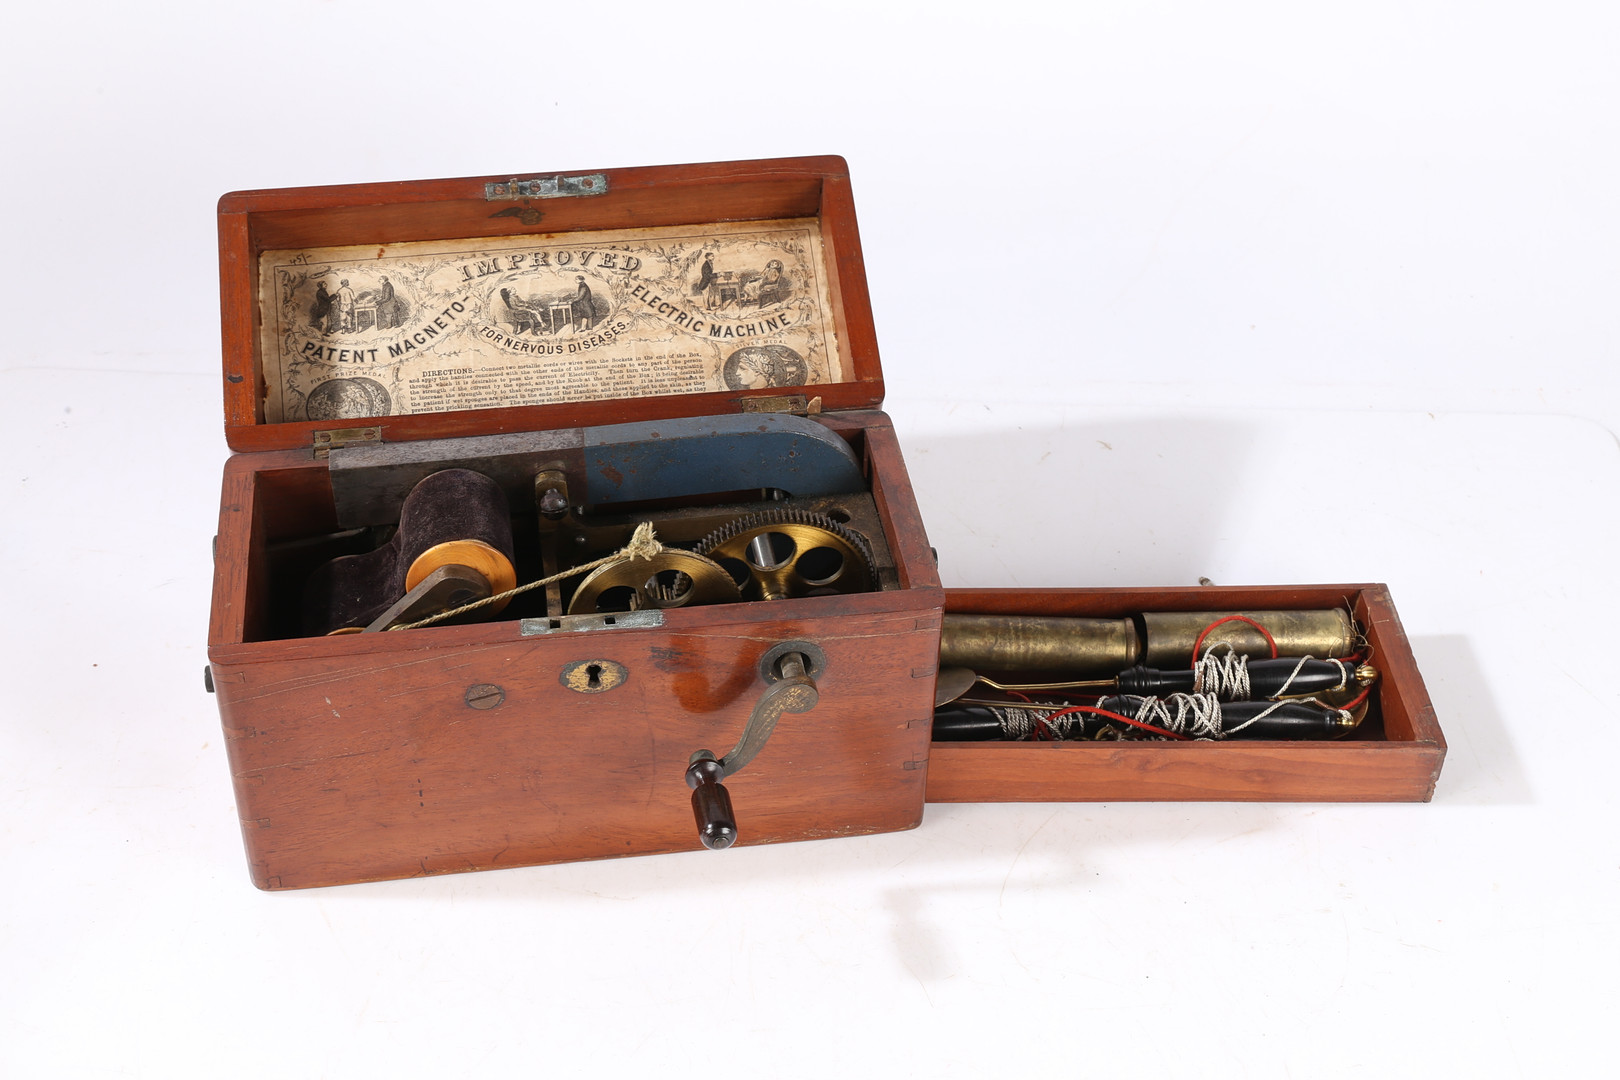 A 19TH CENTURY "IMPROVED PATENT MAGNETO ELECTRIC MACHINE FOR NERVOUS DISEASES". - Image 7 of 10